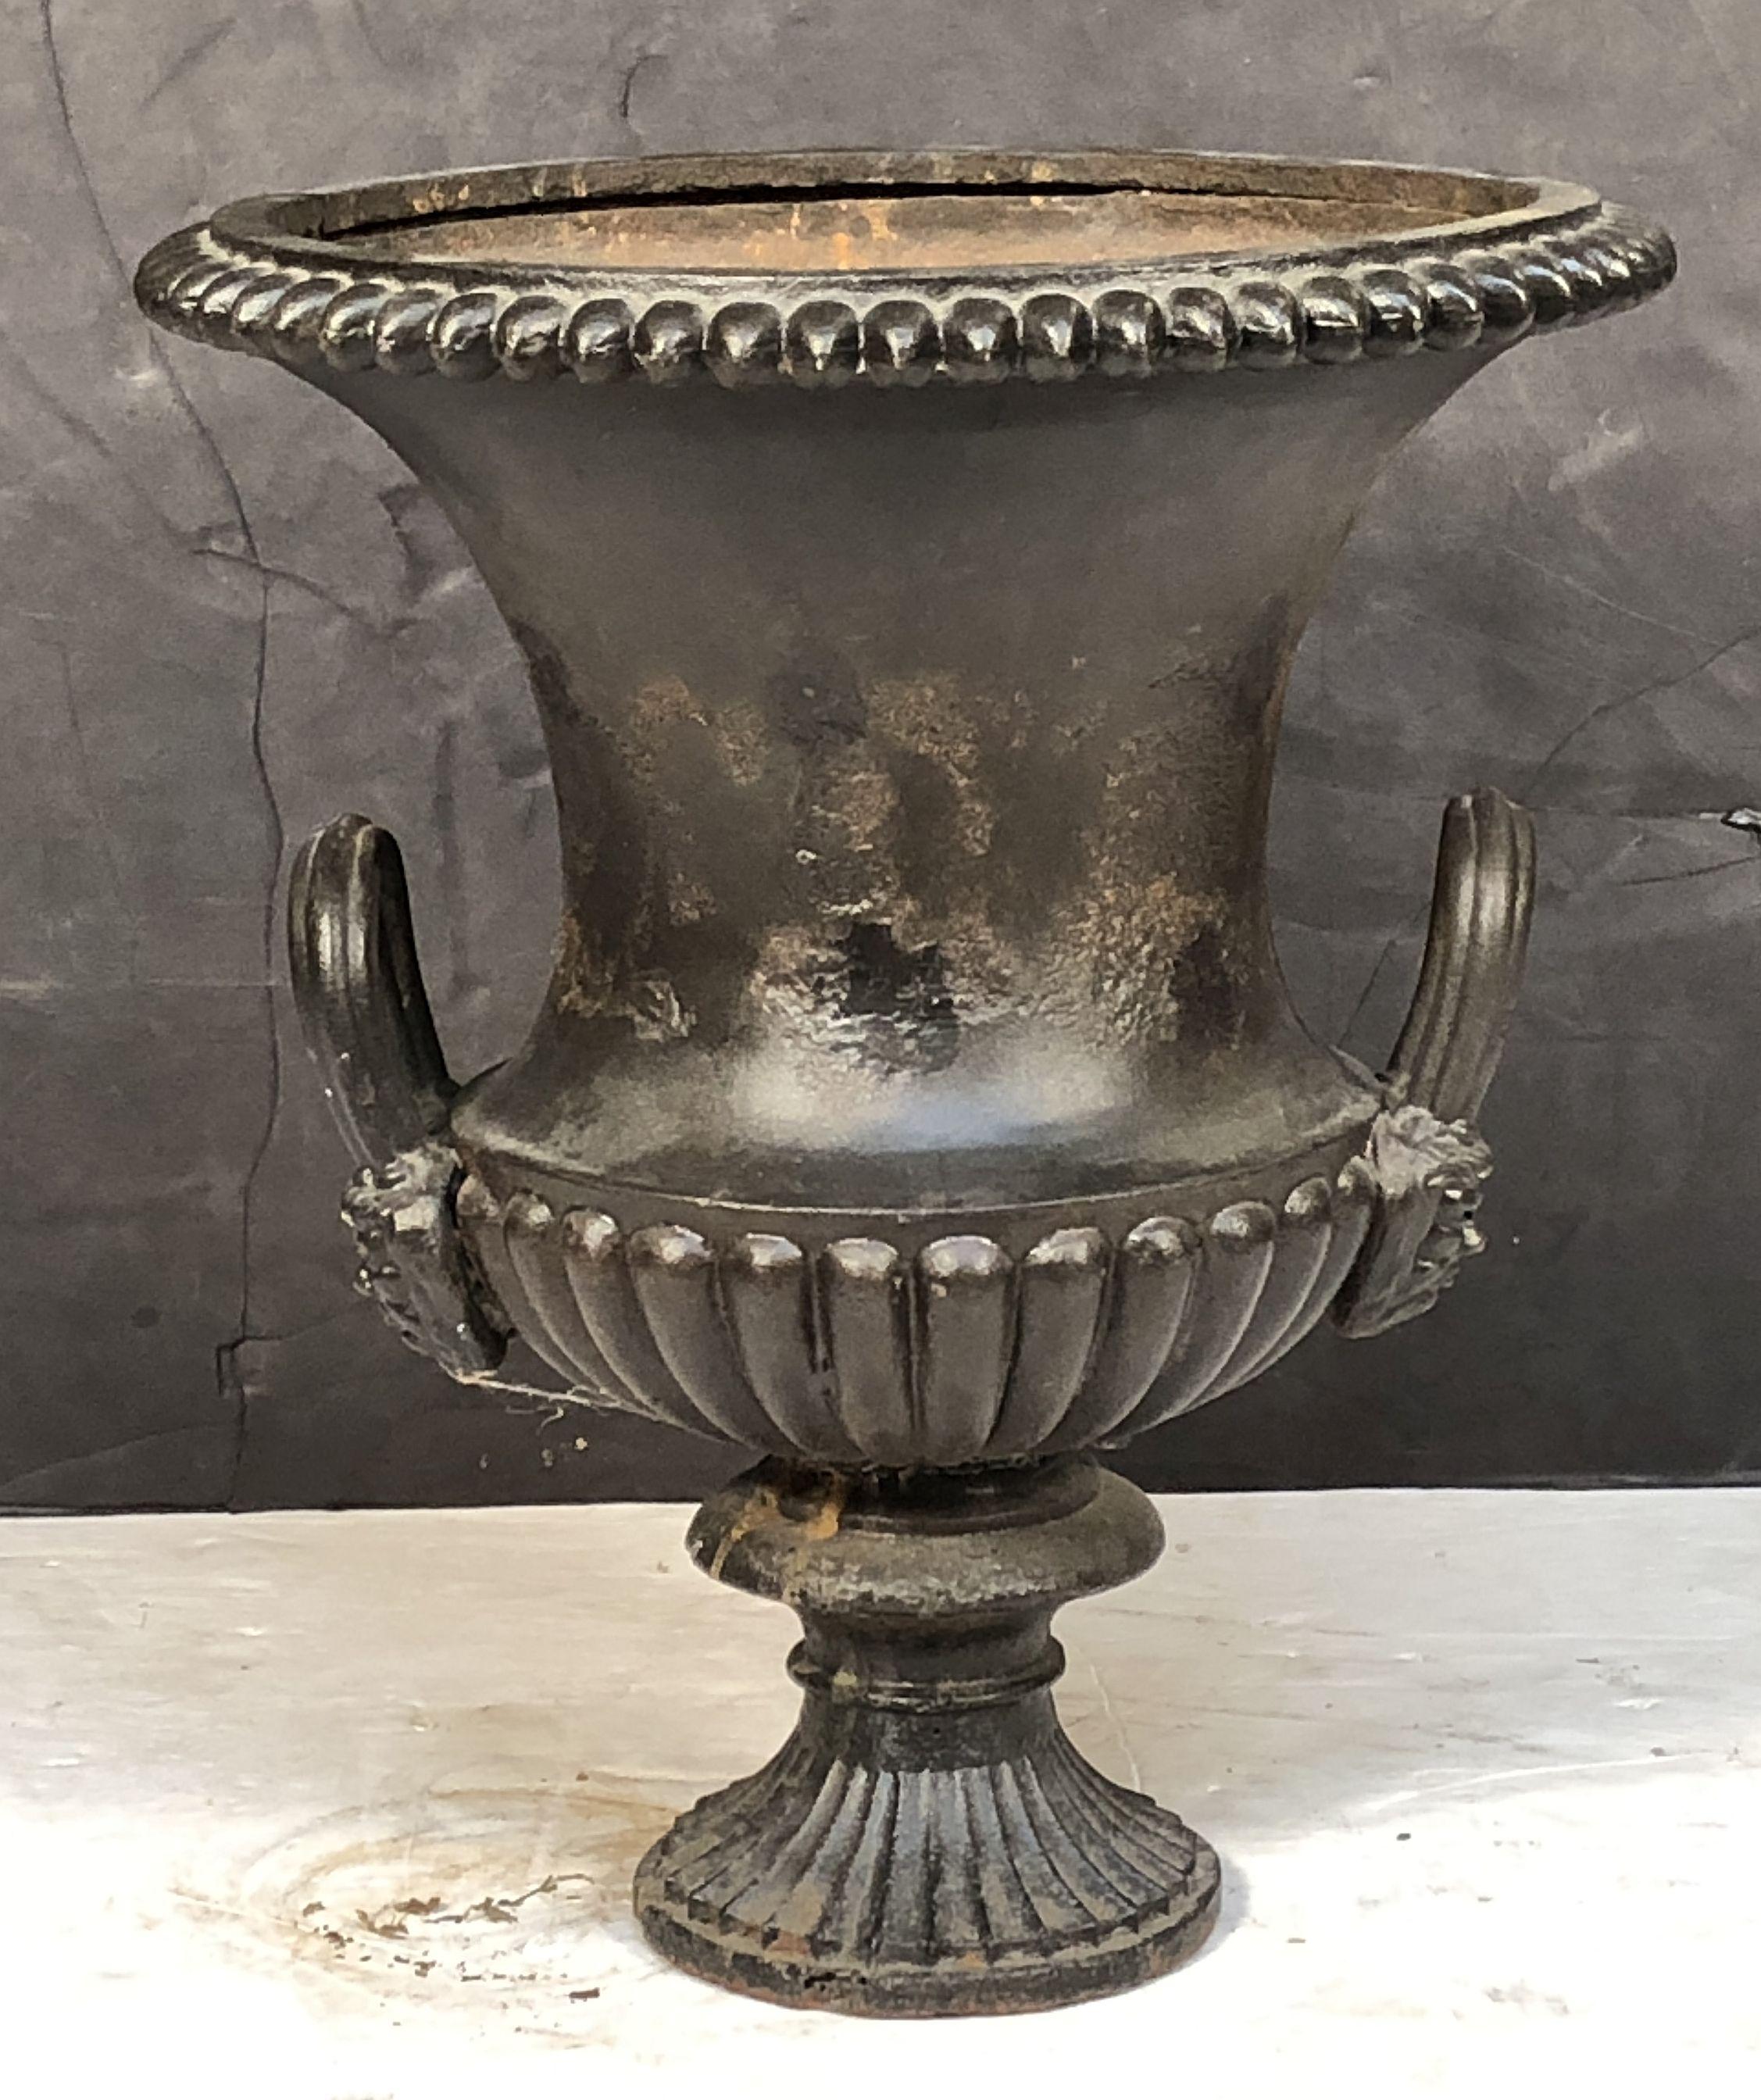 A fine French campana urn or garden planter pot of cast iron in the Classical style, with everted dentil rim, quarter-lobed body, and flared masked handles on reeded round foot. 

Perfect for an indoor or outdoor garden room, garden, or